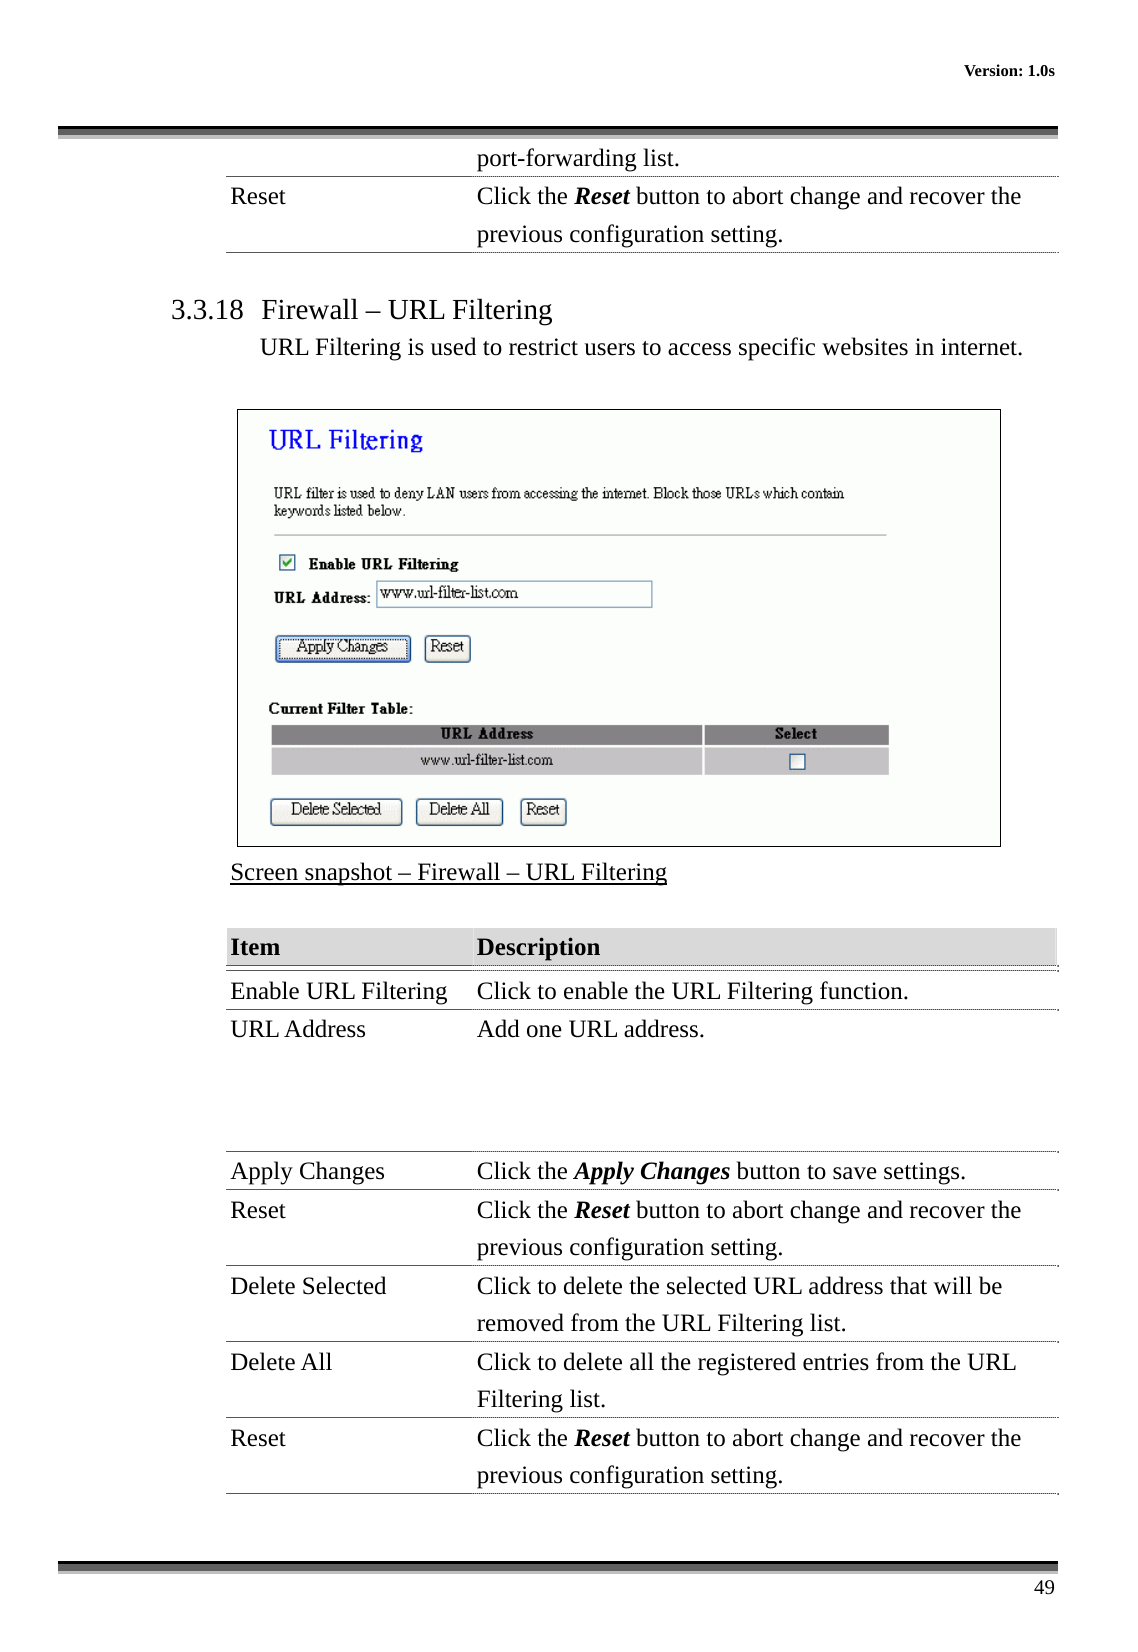      Version: 1.0s      49 port-forwarding list.   Reset Click the Reset button to abort change and recover the previous configuration setting.  3.3.18  Firewall – URL Filtering URL Filtering is used to restrict users to access specific websites in internet.   Screen snapshot – Firewall – URL Filtering  Item  Description   Enable URL Filtering  Click to enable the URL Filtering function. URL Address  Add one URL address. Apply Changes  Click the Apply Changes button to save settings. Reset Click the Reset button to abort change and recover the previous configuration setting. Delete Selected  Click to delete the selected URL address that will be removed from the URL Filtering list. Delete All  Click to delete all the registered entries from the URL Filtering list.   Reset Click the Reset button to abort change and recover the previous configuration setting.  